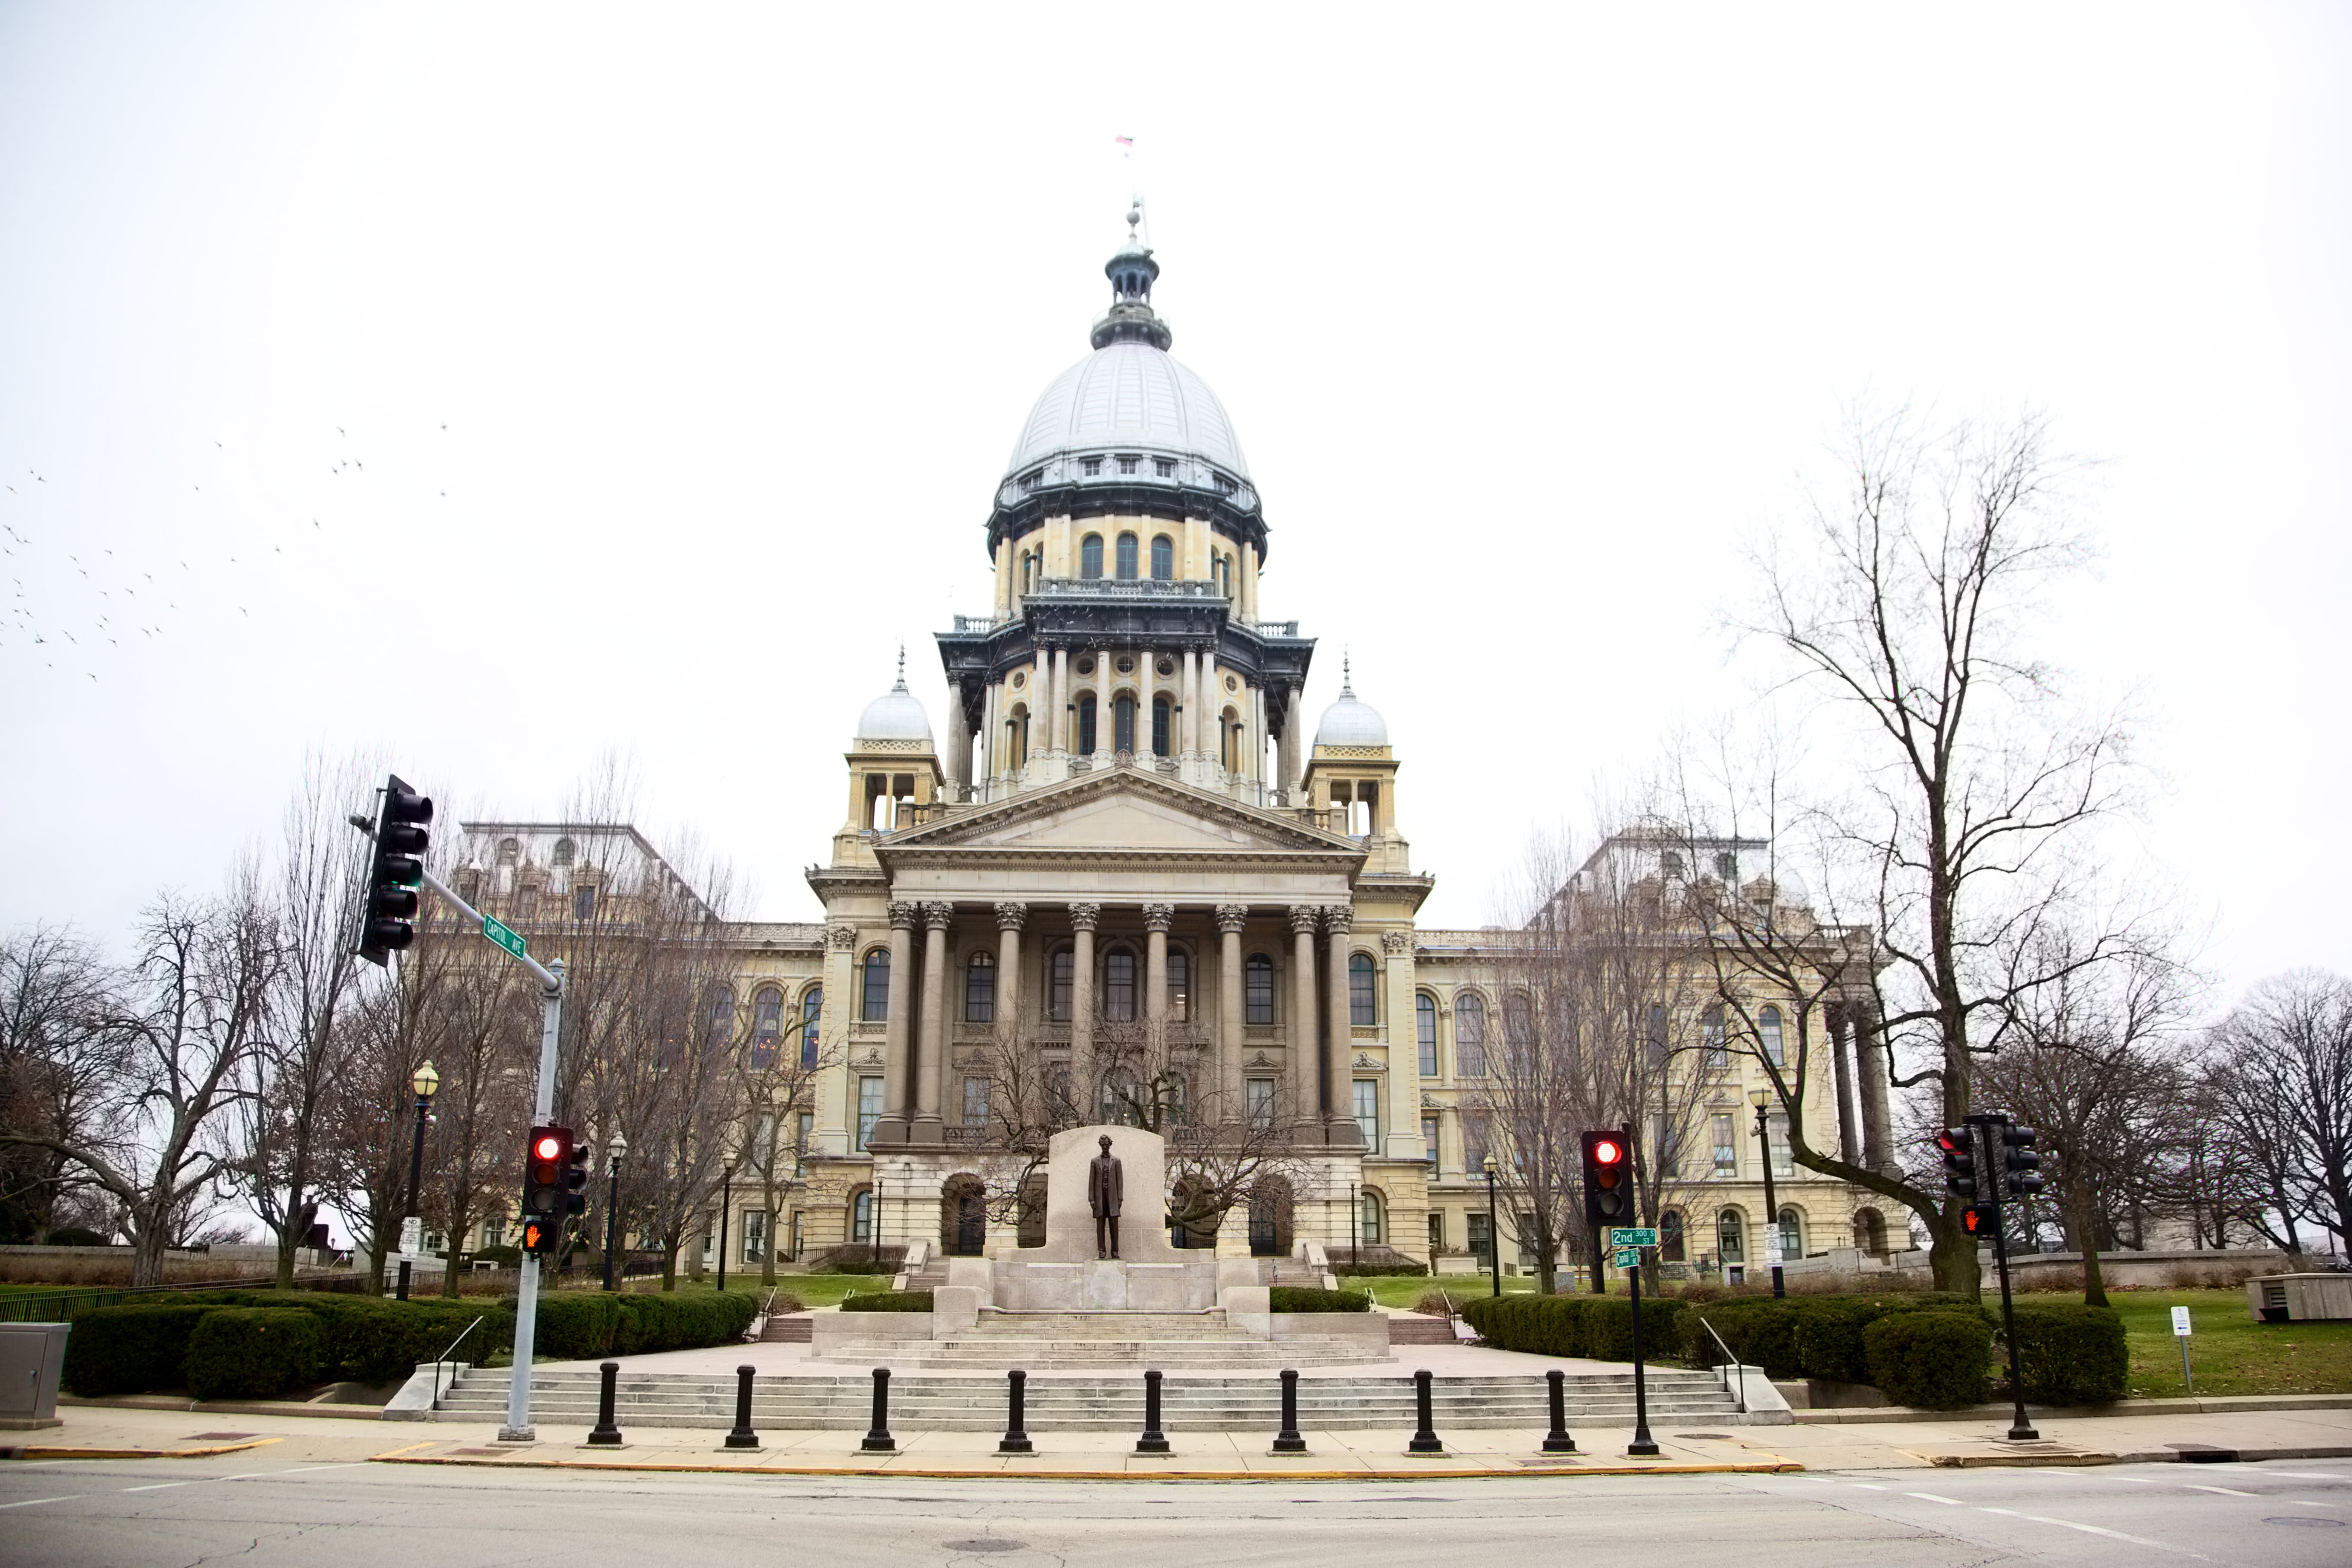 The Illinois State House Capitol in Springfield on a cloudy winter day